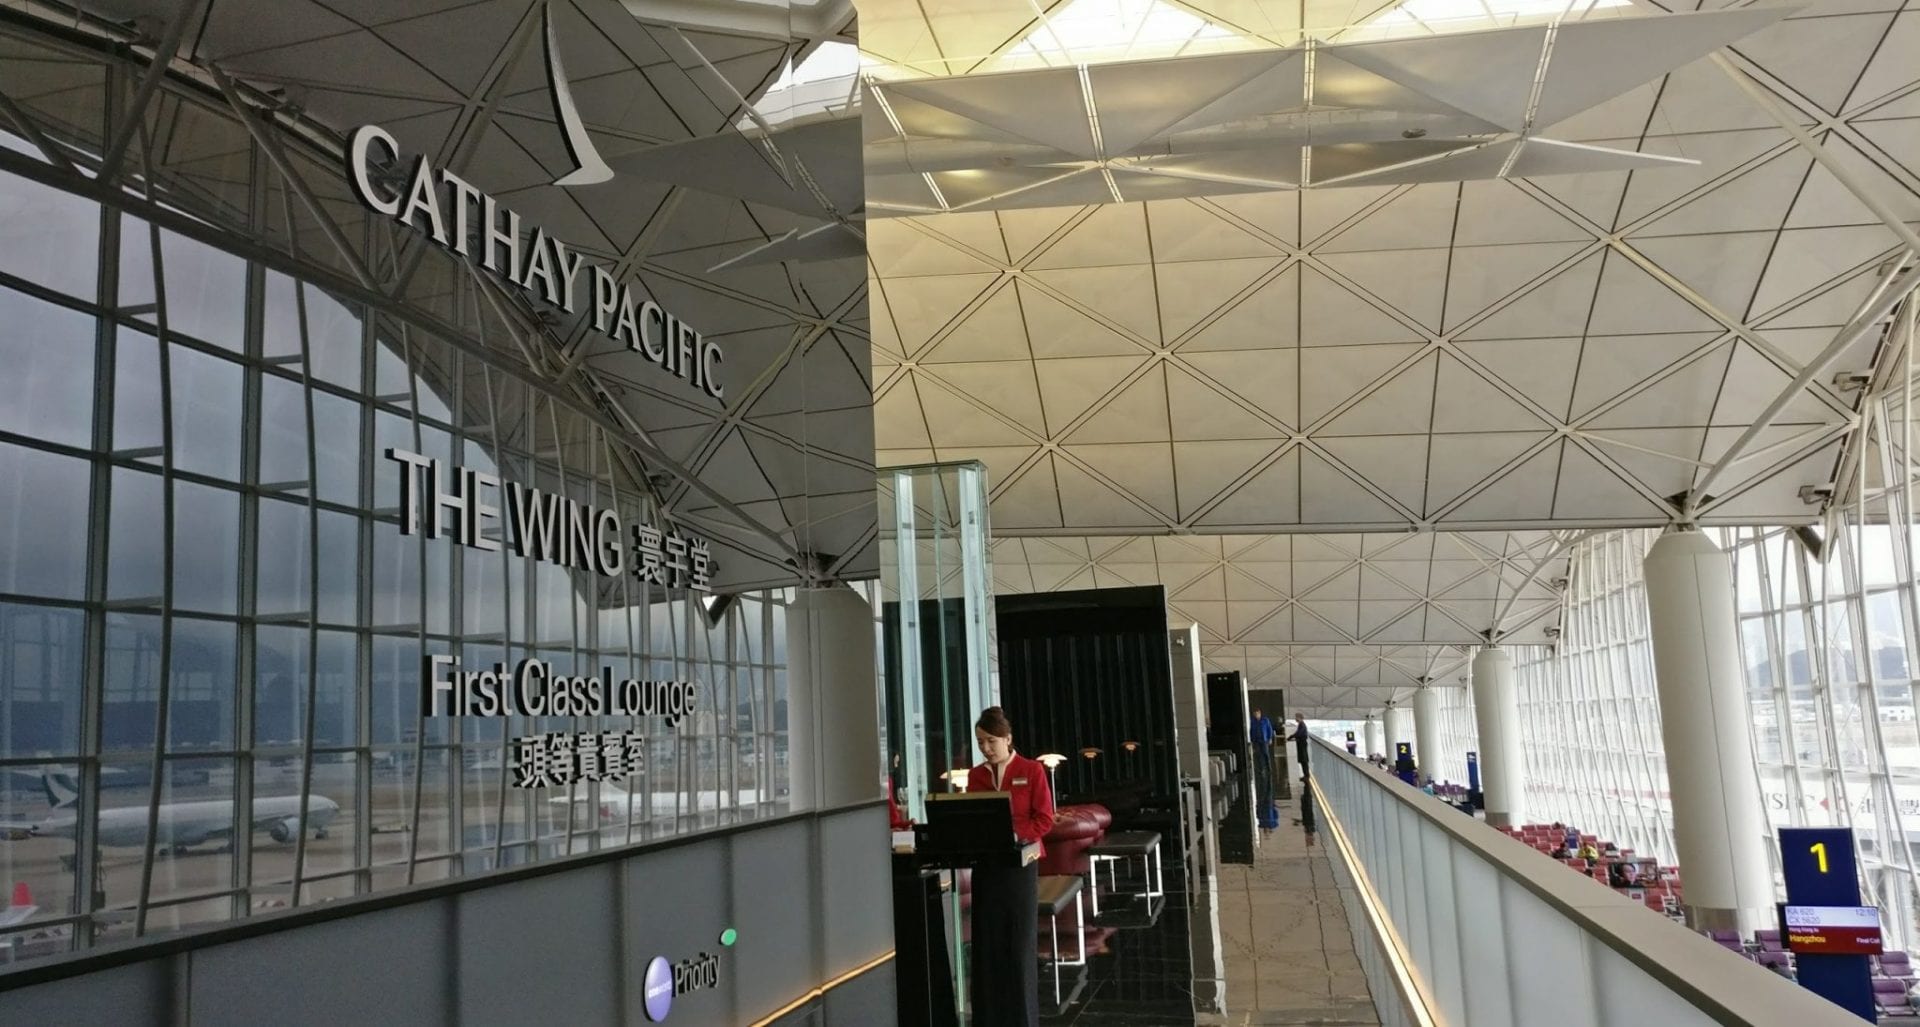 cathay pacific the wing first class lounge hong kong entrance